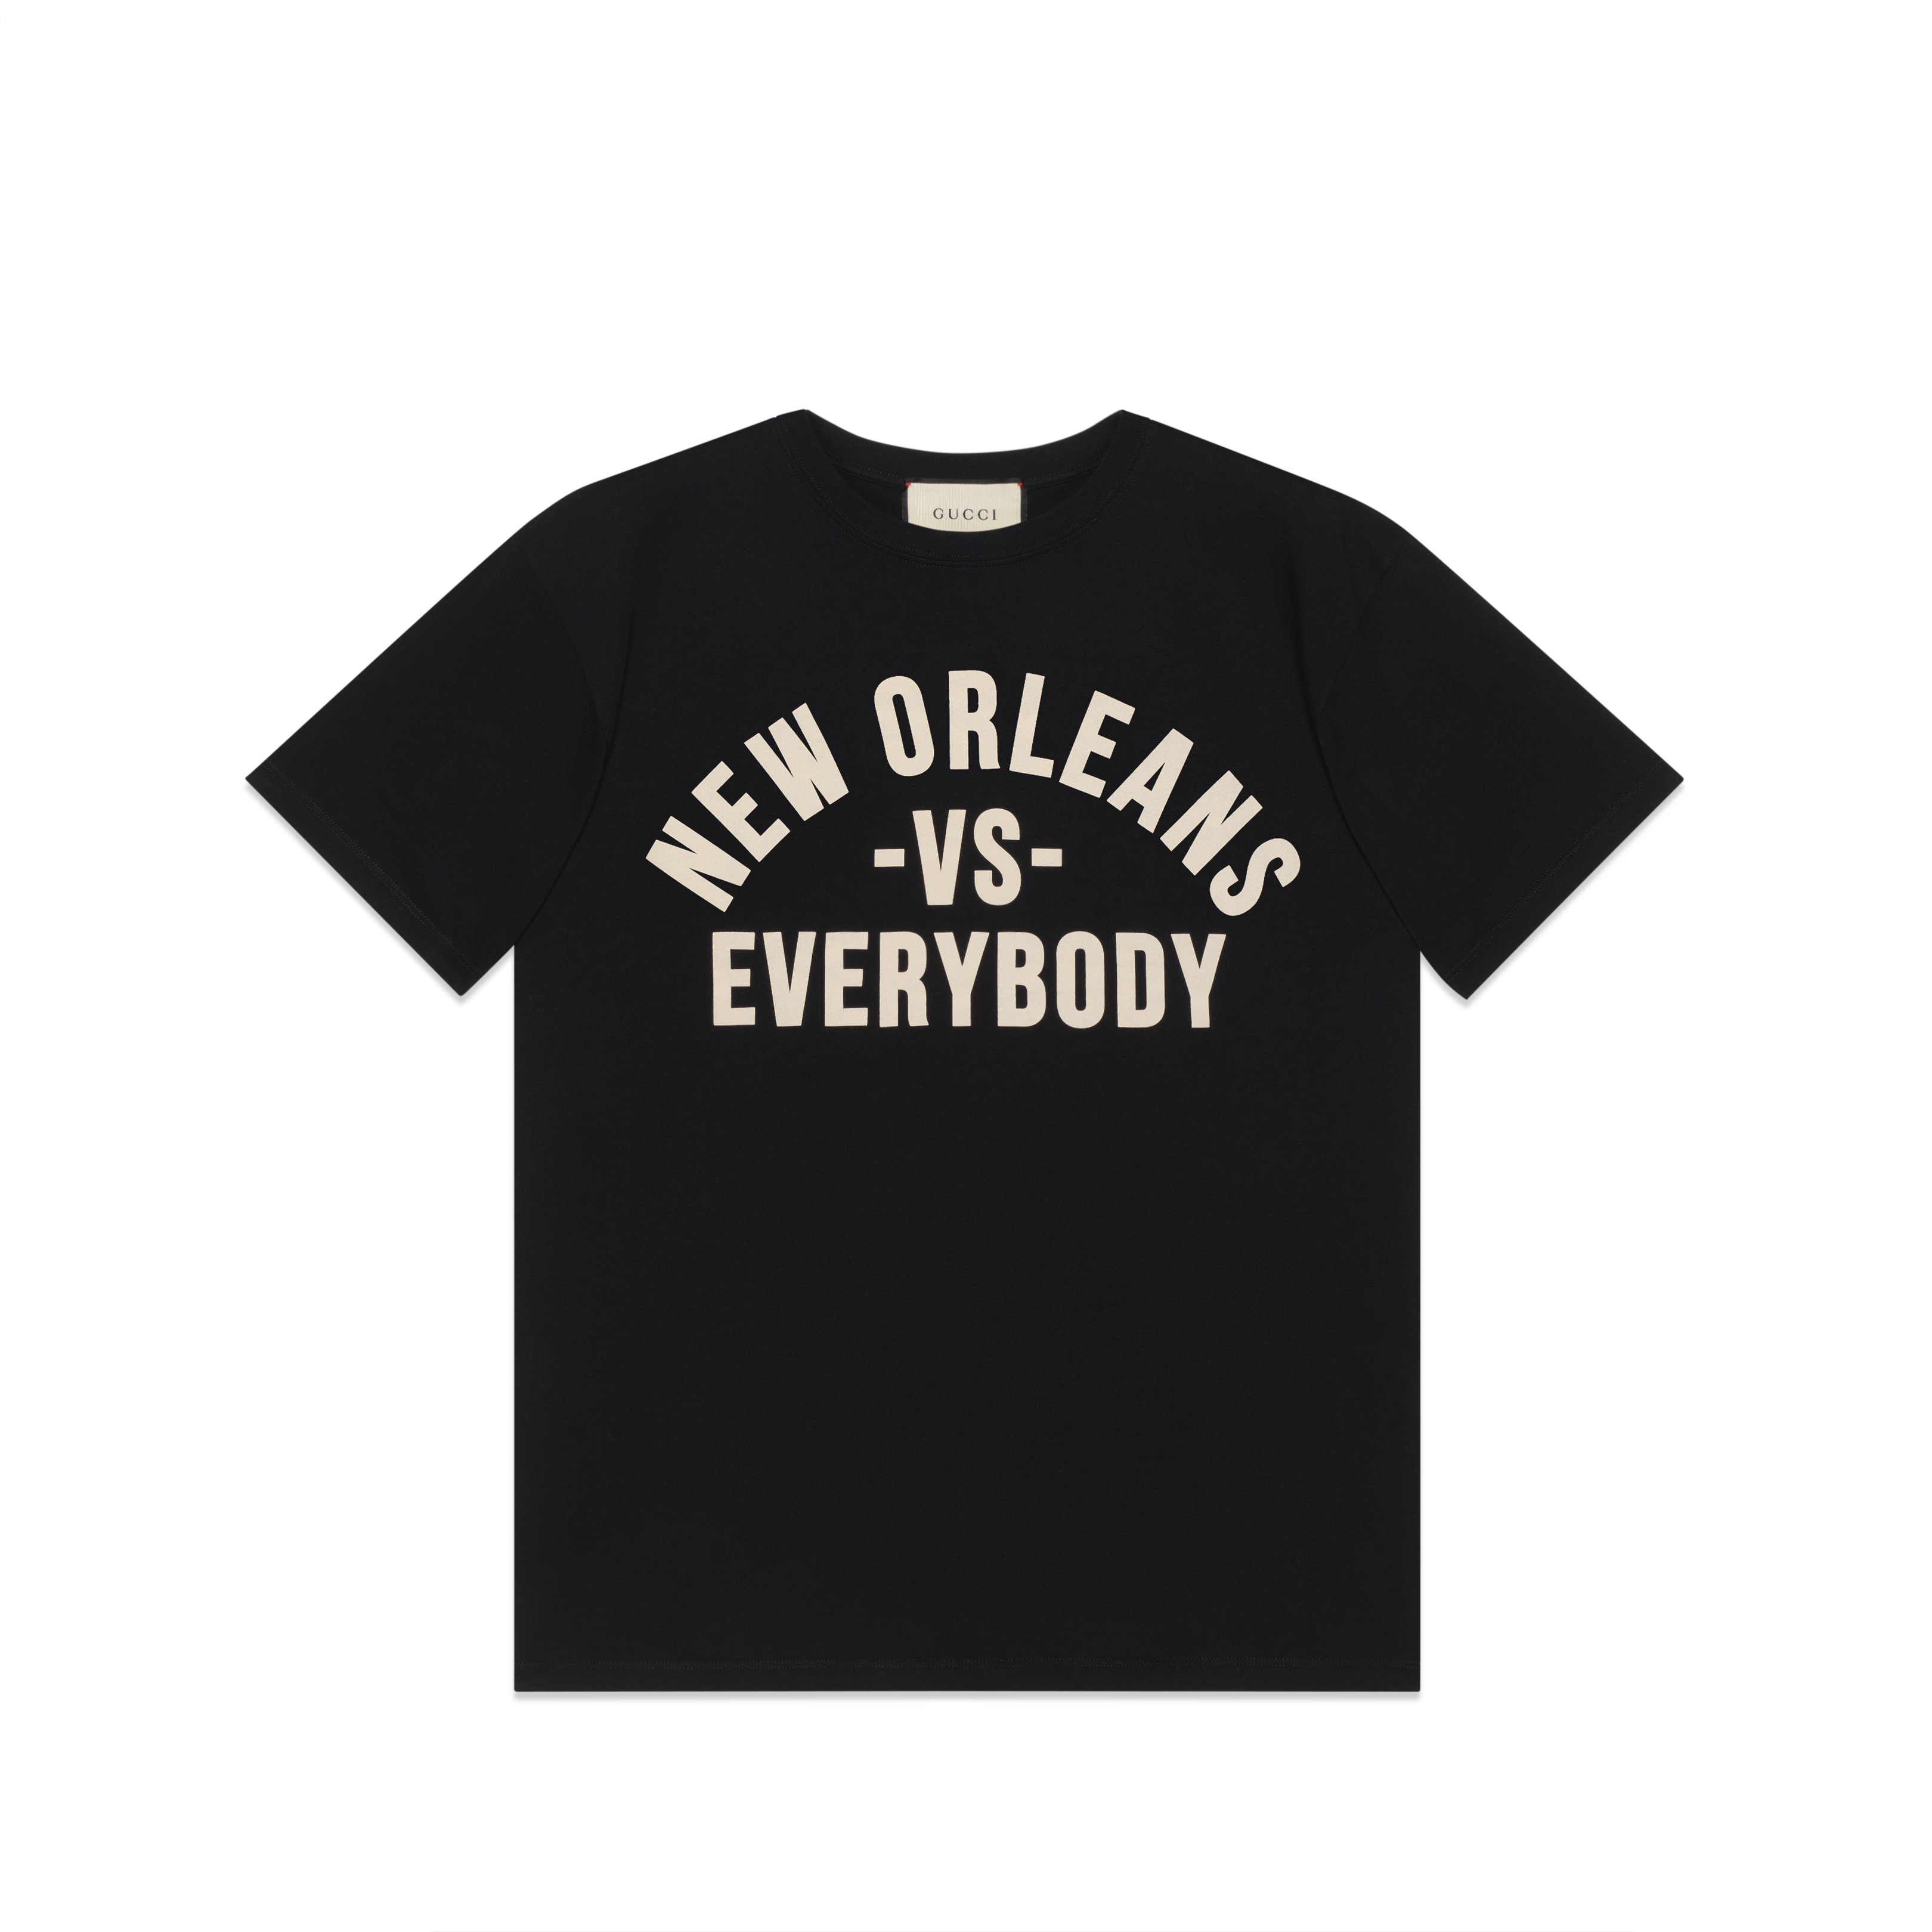 Gucci, Detroit Vs. Everybody team up to create limited-edition T-shirt